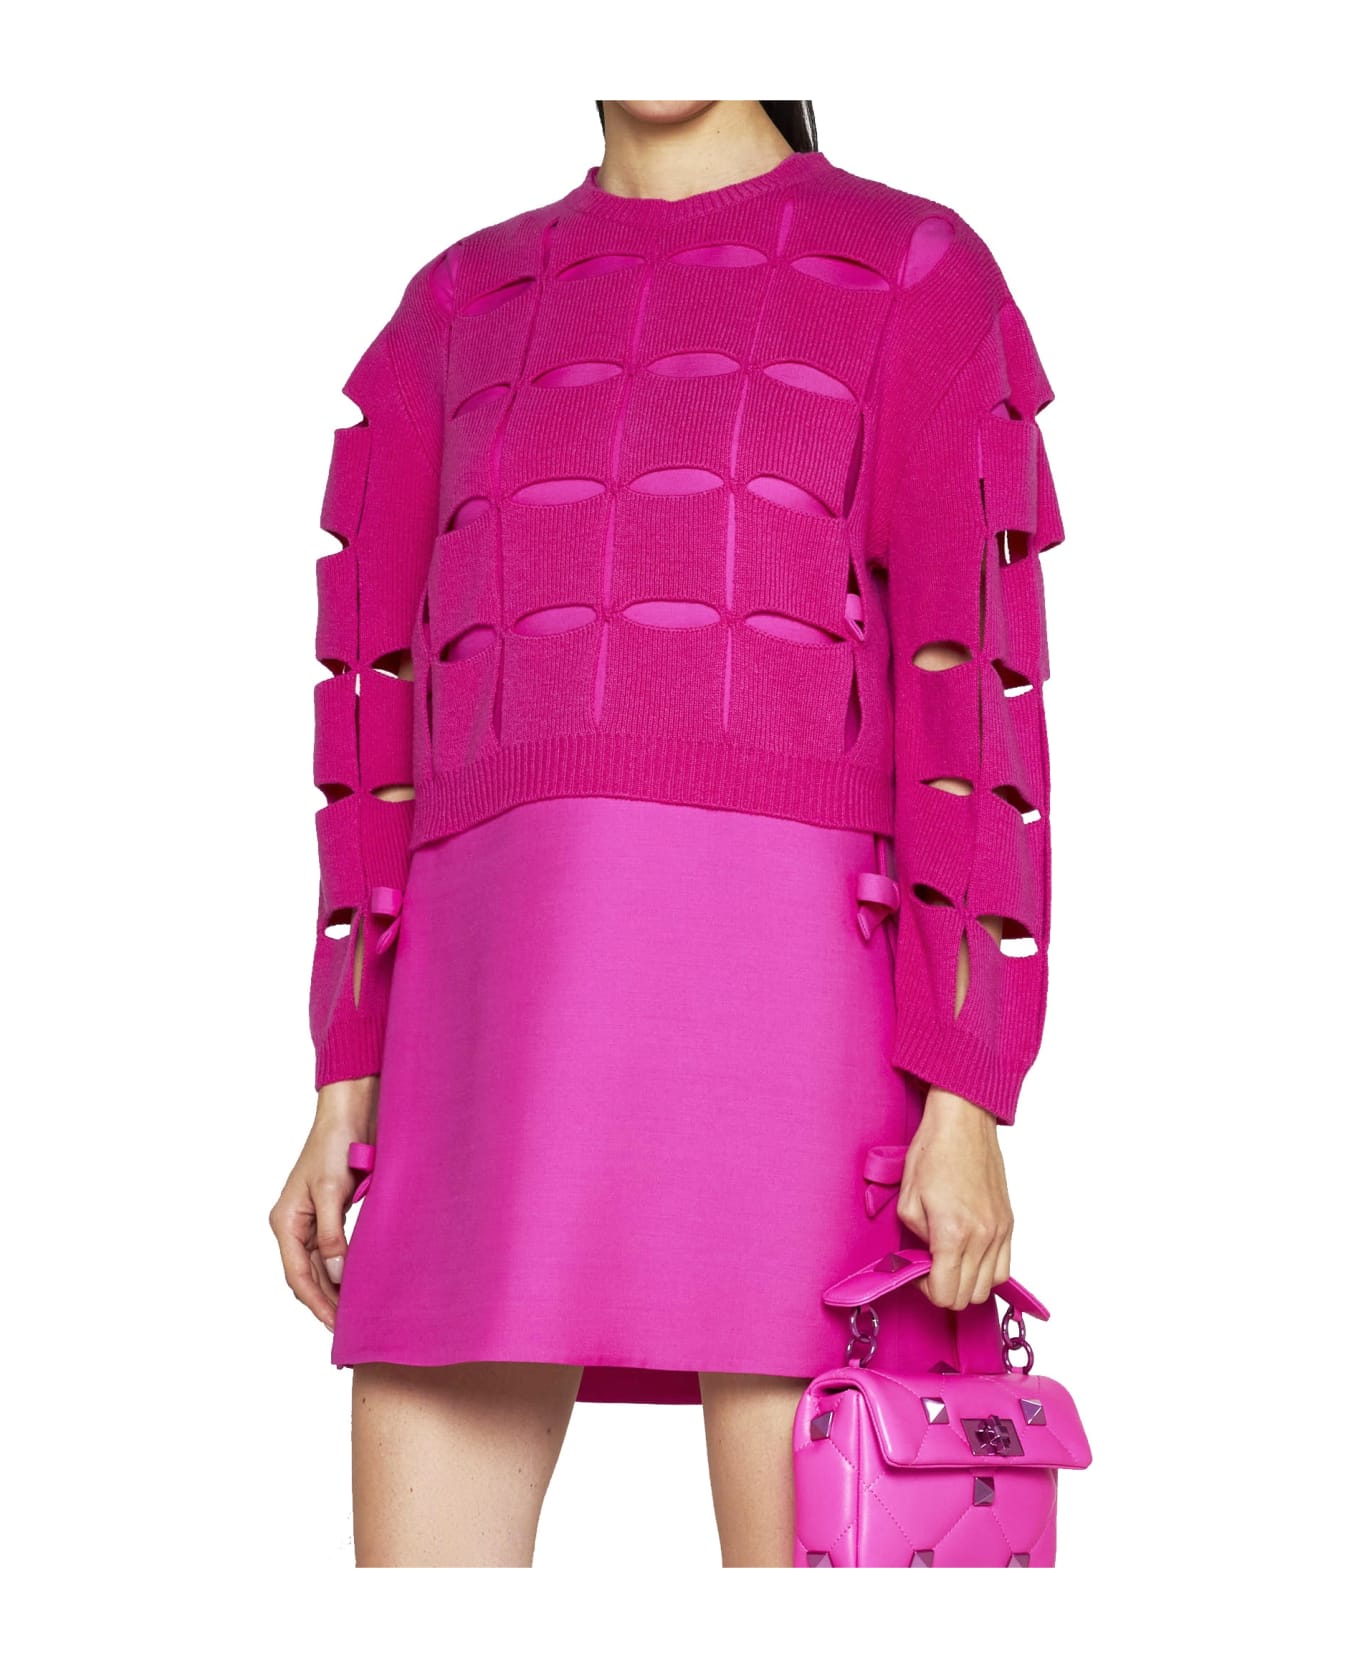 Valentino Cut-out Wool Sweater - Pink ニットウェア